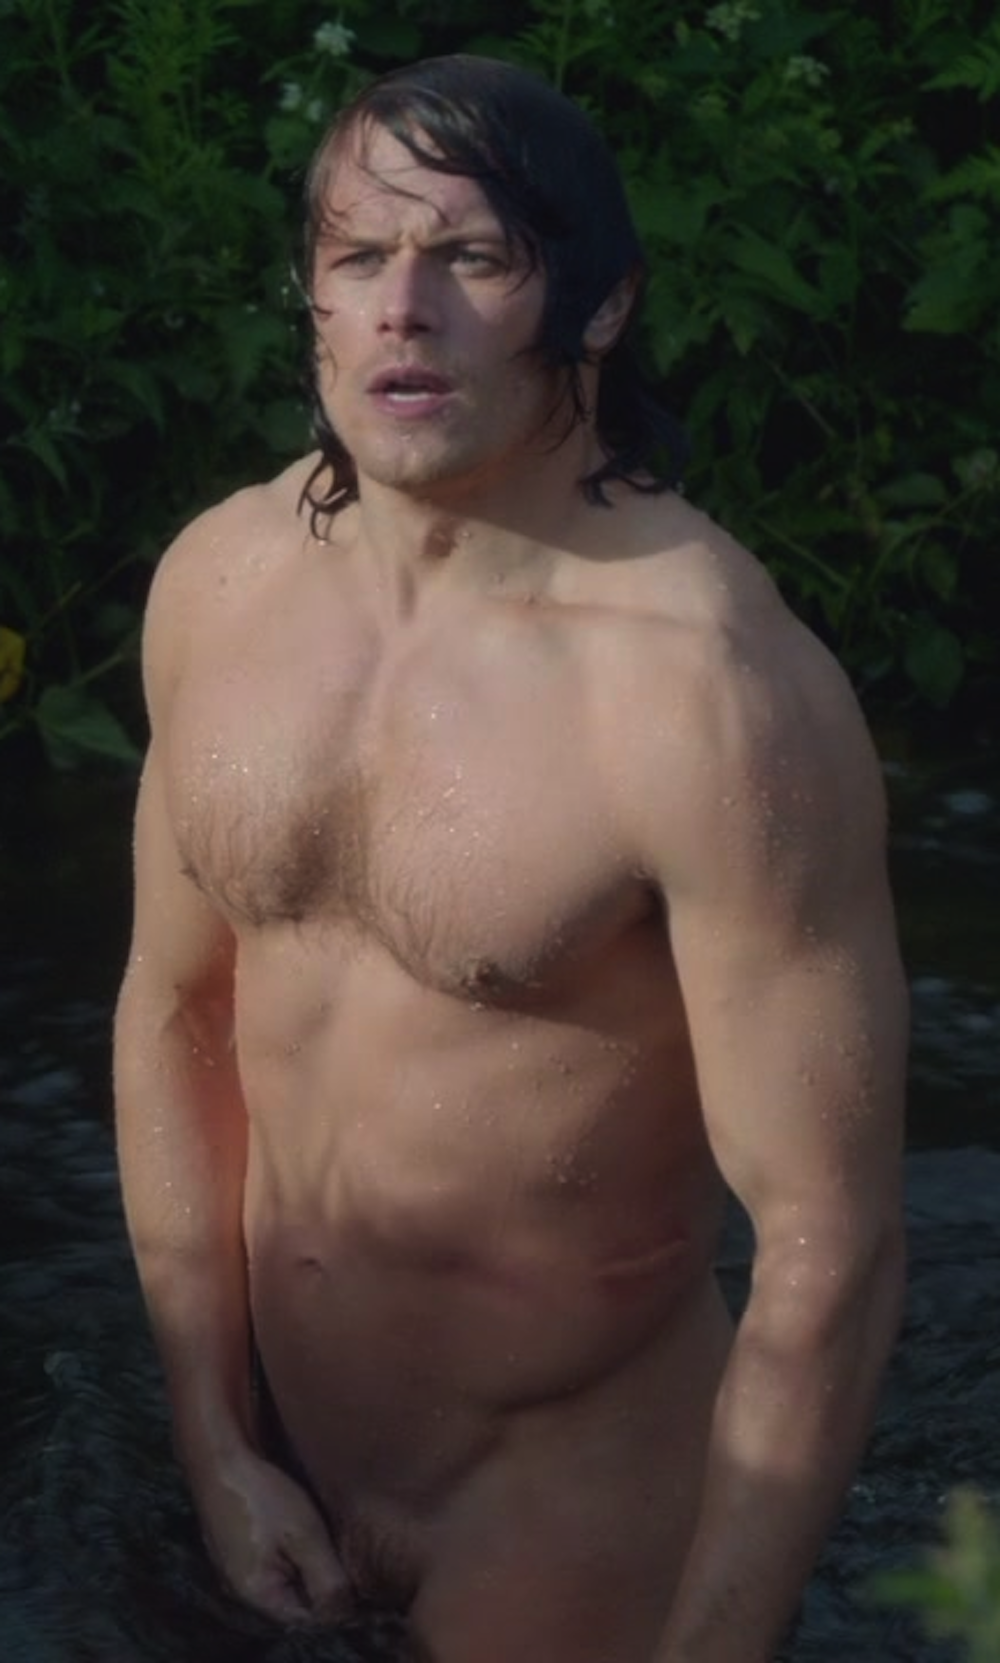 Sam Heughan Tries To Hide His Massive Cock (GIFs)